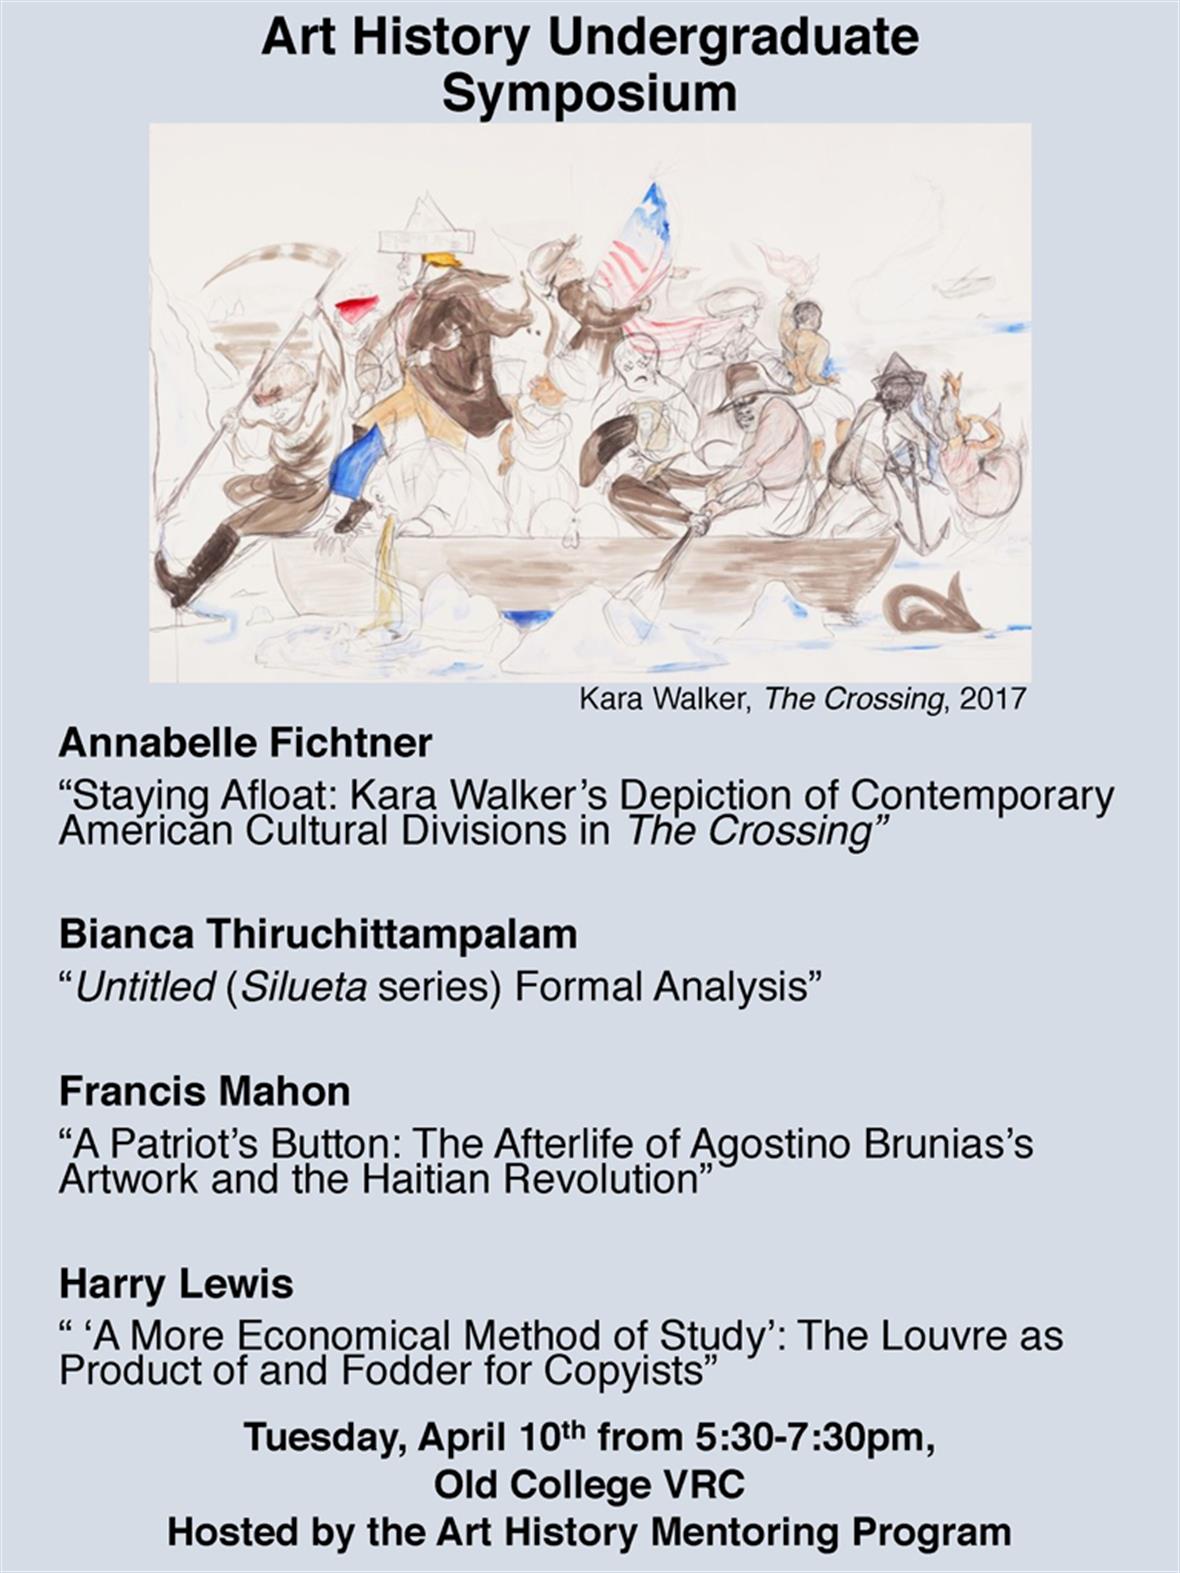 Flyer for the symposium. There will be talks from Annabelle Fichtner, Bianca Thiruchittampalam, Francis Mahon, and Harry Lewis